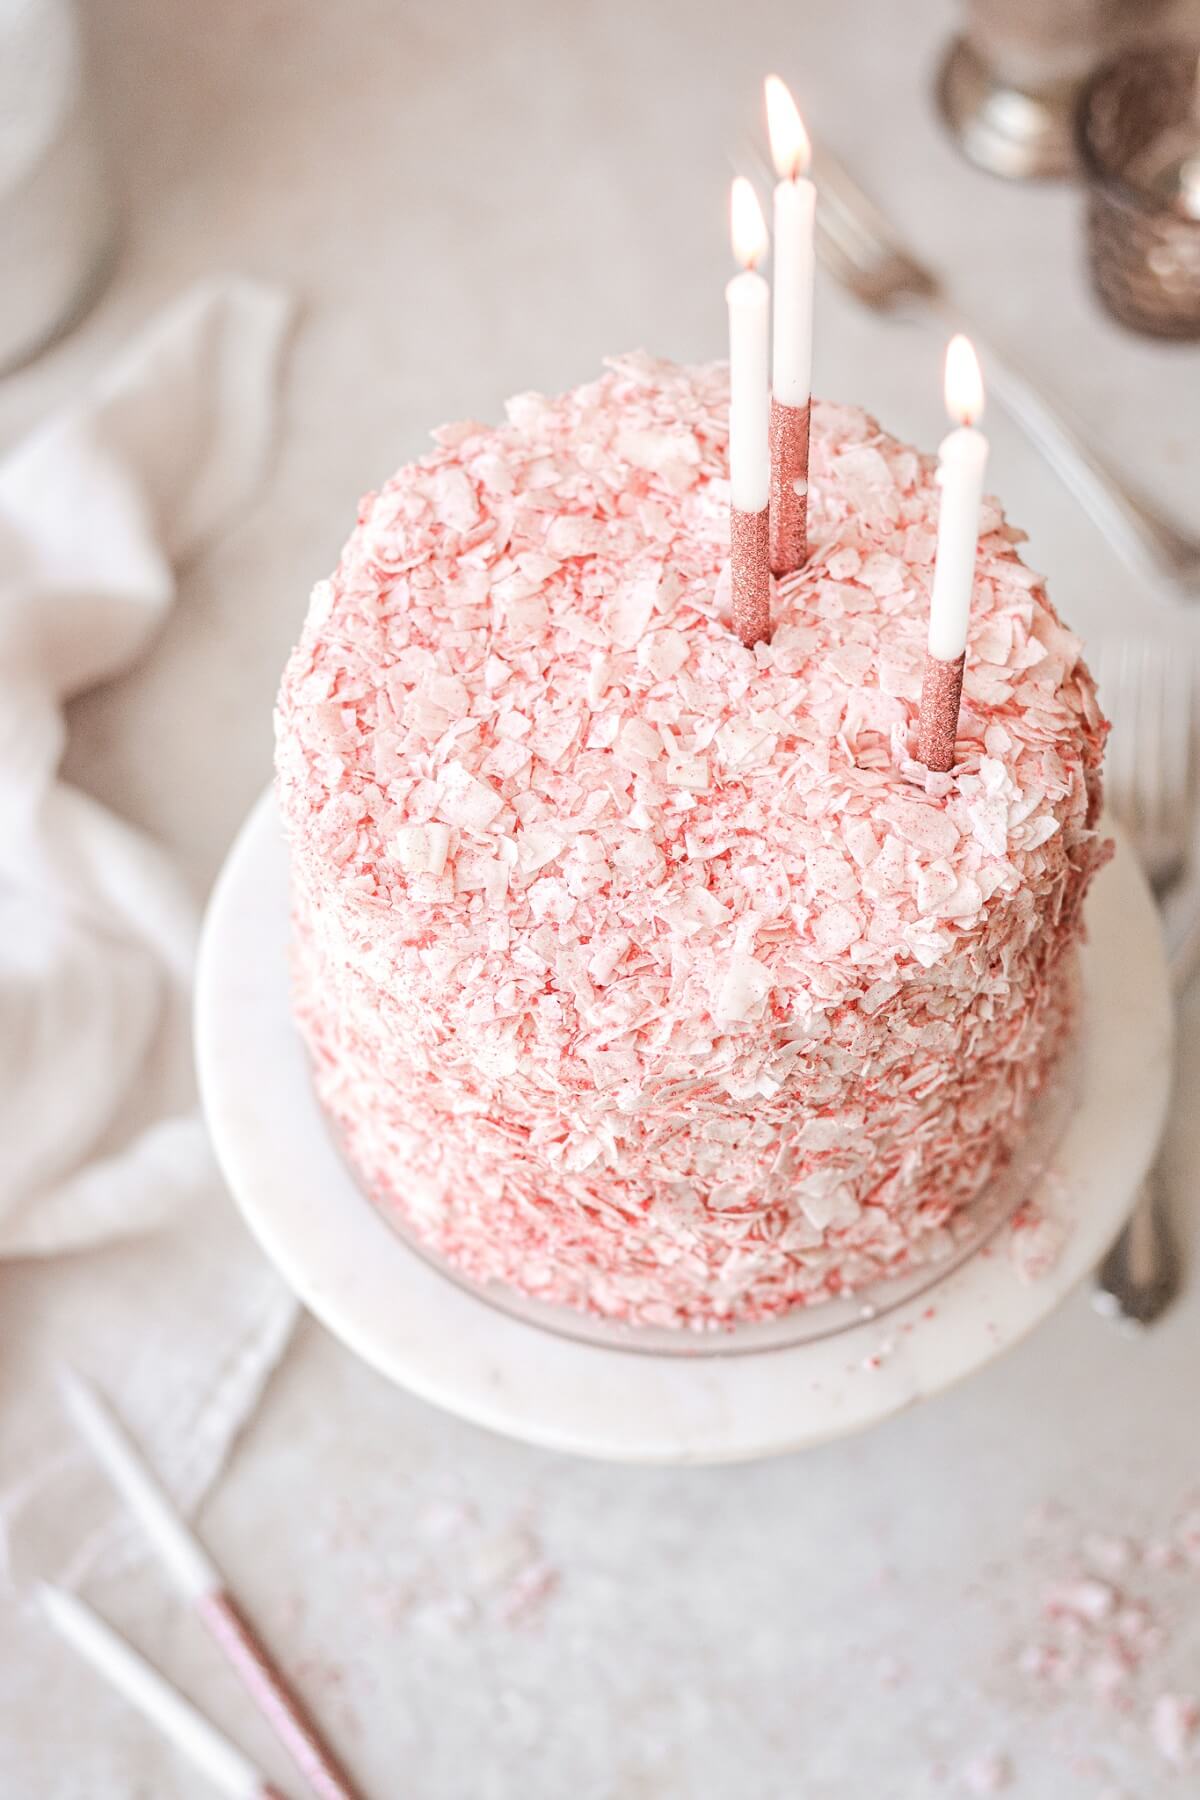 Strawberry coconut cake with birthday candles.